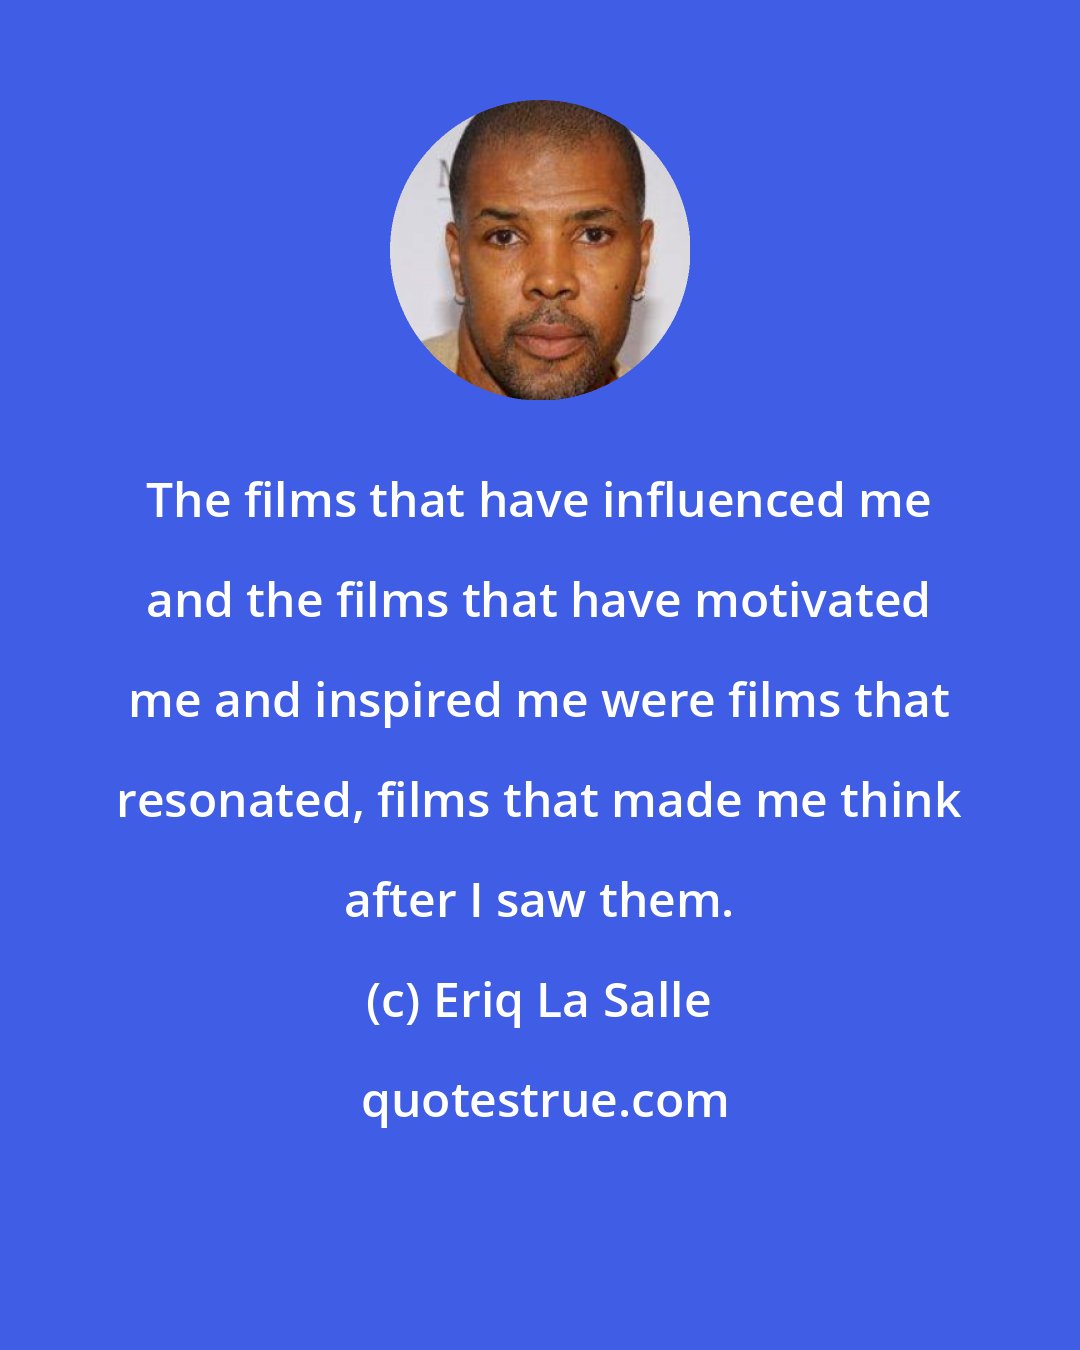 Eriq La Salle: The films that have influenced me and the films that have motivated me and inspired me were films that resonated, films that made me think after I saw them.